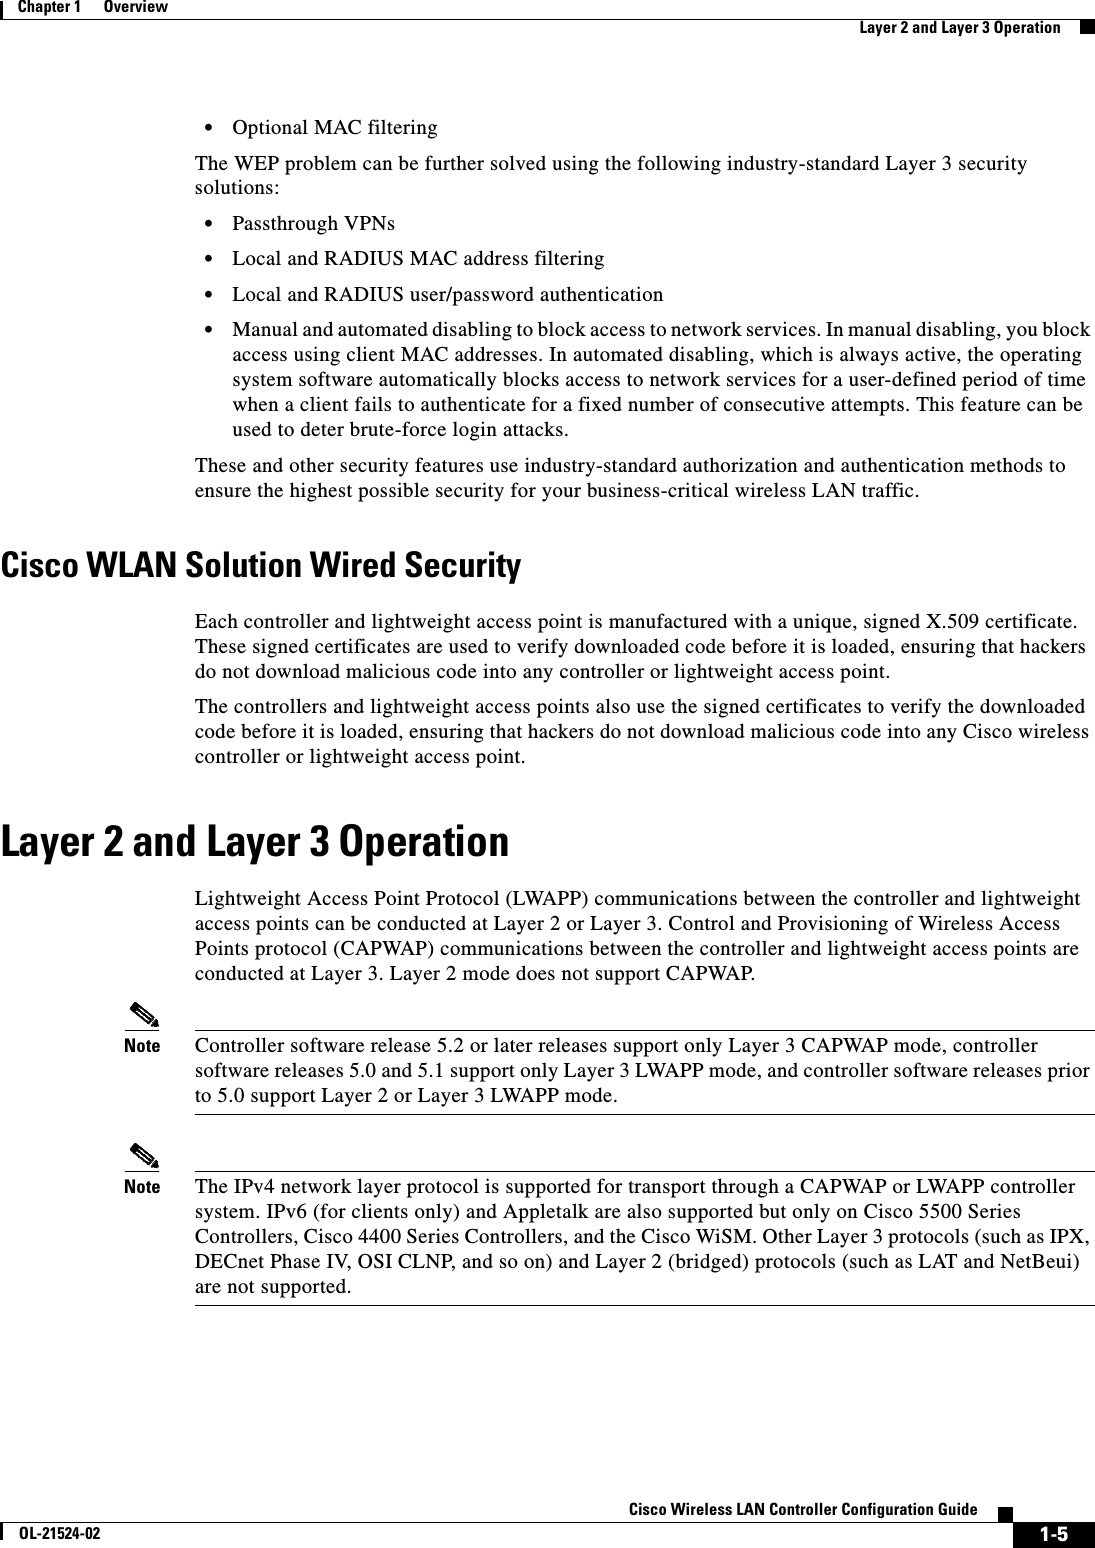  1-5Cisco Wireless LAN Controller Configuration GuideOL-21524-02Chapter 1      OverviewLayer 2 and Layer 3 Operation  • Optional MAC filteringThe WEP problem can be further solved using the following industry-standard Layer 3 security solutions:  • Passthrough VPNs   • Local and RADIUS MAC address filtering  • Local and RADIUS user/password authentication  • Manual and automated disabling to block access to network services. In manual disabling, you block access using client MAC addresses. In automated disabling, which is always active, the operating system software automatically blocks access to network services for a user-defined period of time when a client fails to authenticate for a fixed number of consecutive attempts. This feature can be used to deter brute-force login attacks.These and other security features use industry-standard authorization and authentication methods to ensure the highest possible security for your business-critical wireless LAN traffic.Cisco WLAN Solution Wired SecurityEach controller and lightweight access point is manufactured with a unique, signed X.509 certificate. These signed certificates are used to verify downloaded code before it is loaded, ensuring that hackers do not download malicious code into any controller or lightweight access point.The controllers and lightweight access points also use the signed certificates to verify the downloaded code before it is loaded, ensuring that hackers do not download malicious code into any Cisco wireless controller or lightweight access point. Layer 2 and Layer 3 OperationLightweight Access Point Protocol (LWAPP) communications between the controller and lightweight access points can be conducted at Layer 2 or Layer 3. Control and Provisioning of Wireless Access Points protocol (CAPWAP) communications between the controller and lightweight access points are conducted at Layer 3. Layer 2 mode does not support CAPWAP.Note Controller software release 5.2 or later releases support only Layer 3 CAPWAP mode, controller software releases 5.0 and 5.1 support only Layer 3 LWAPP mode, and controller software releases prior to 5.0 support Layer 2 or Layer 3 LWAPP mode.Note The IPv4 network layer protocol is supported for transport through a CAPWAP or LWAPP controller system. IPv6 (for clients only) and Appletalk are also supported but only on Cisco 5500 Series Controllers, Cisco 4400 Series Controllers, and the Cisco WiSM. Other Layer 3 protocols (such as IPX, DECnet Phase IV, OSI CLNP, and so on) and Layer 2 (bridged) protocols (such as LAT and NetBeui) are not supported.